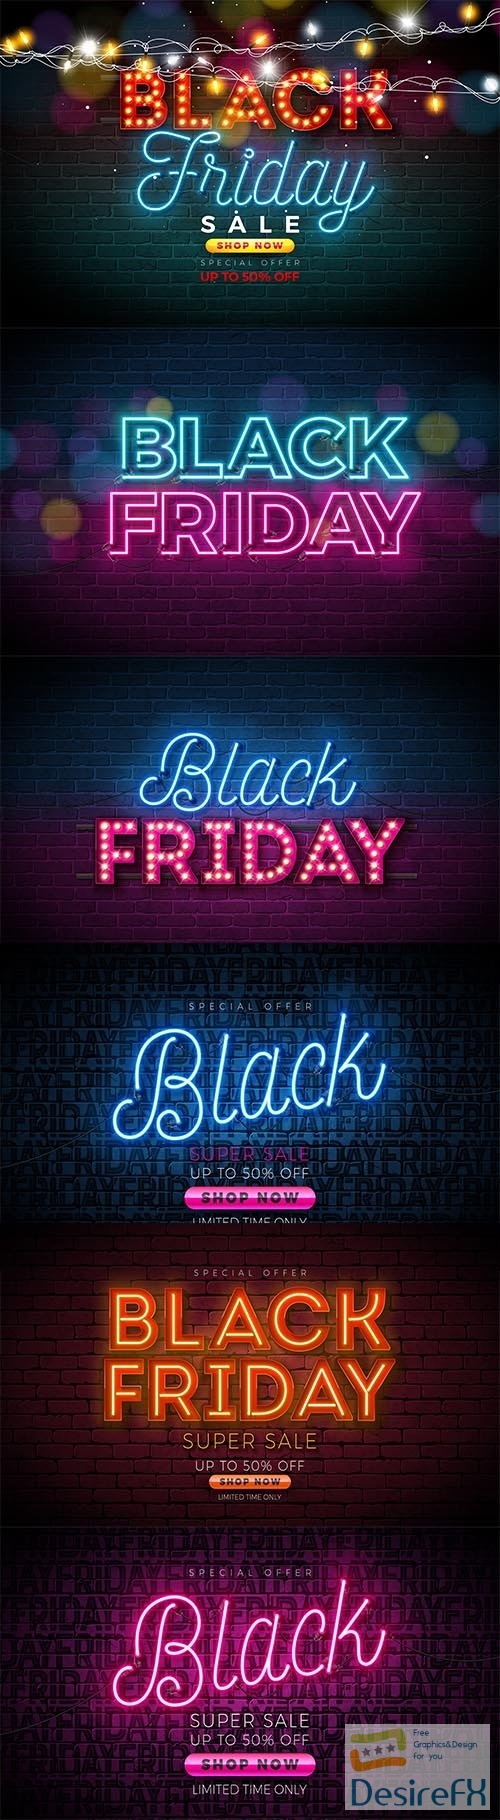 Neon black friday sale illustration with 3d lettering vector